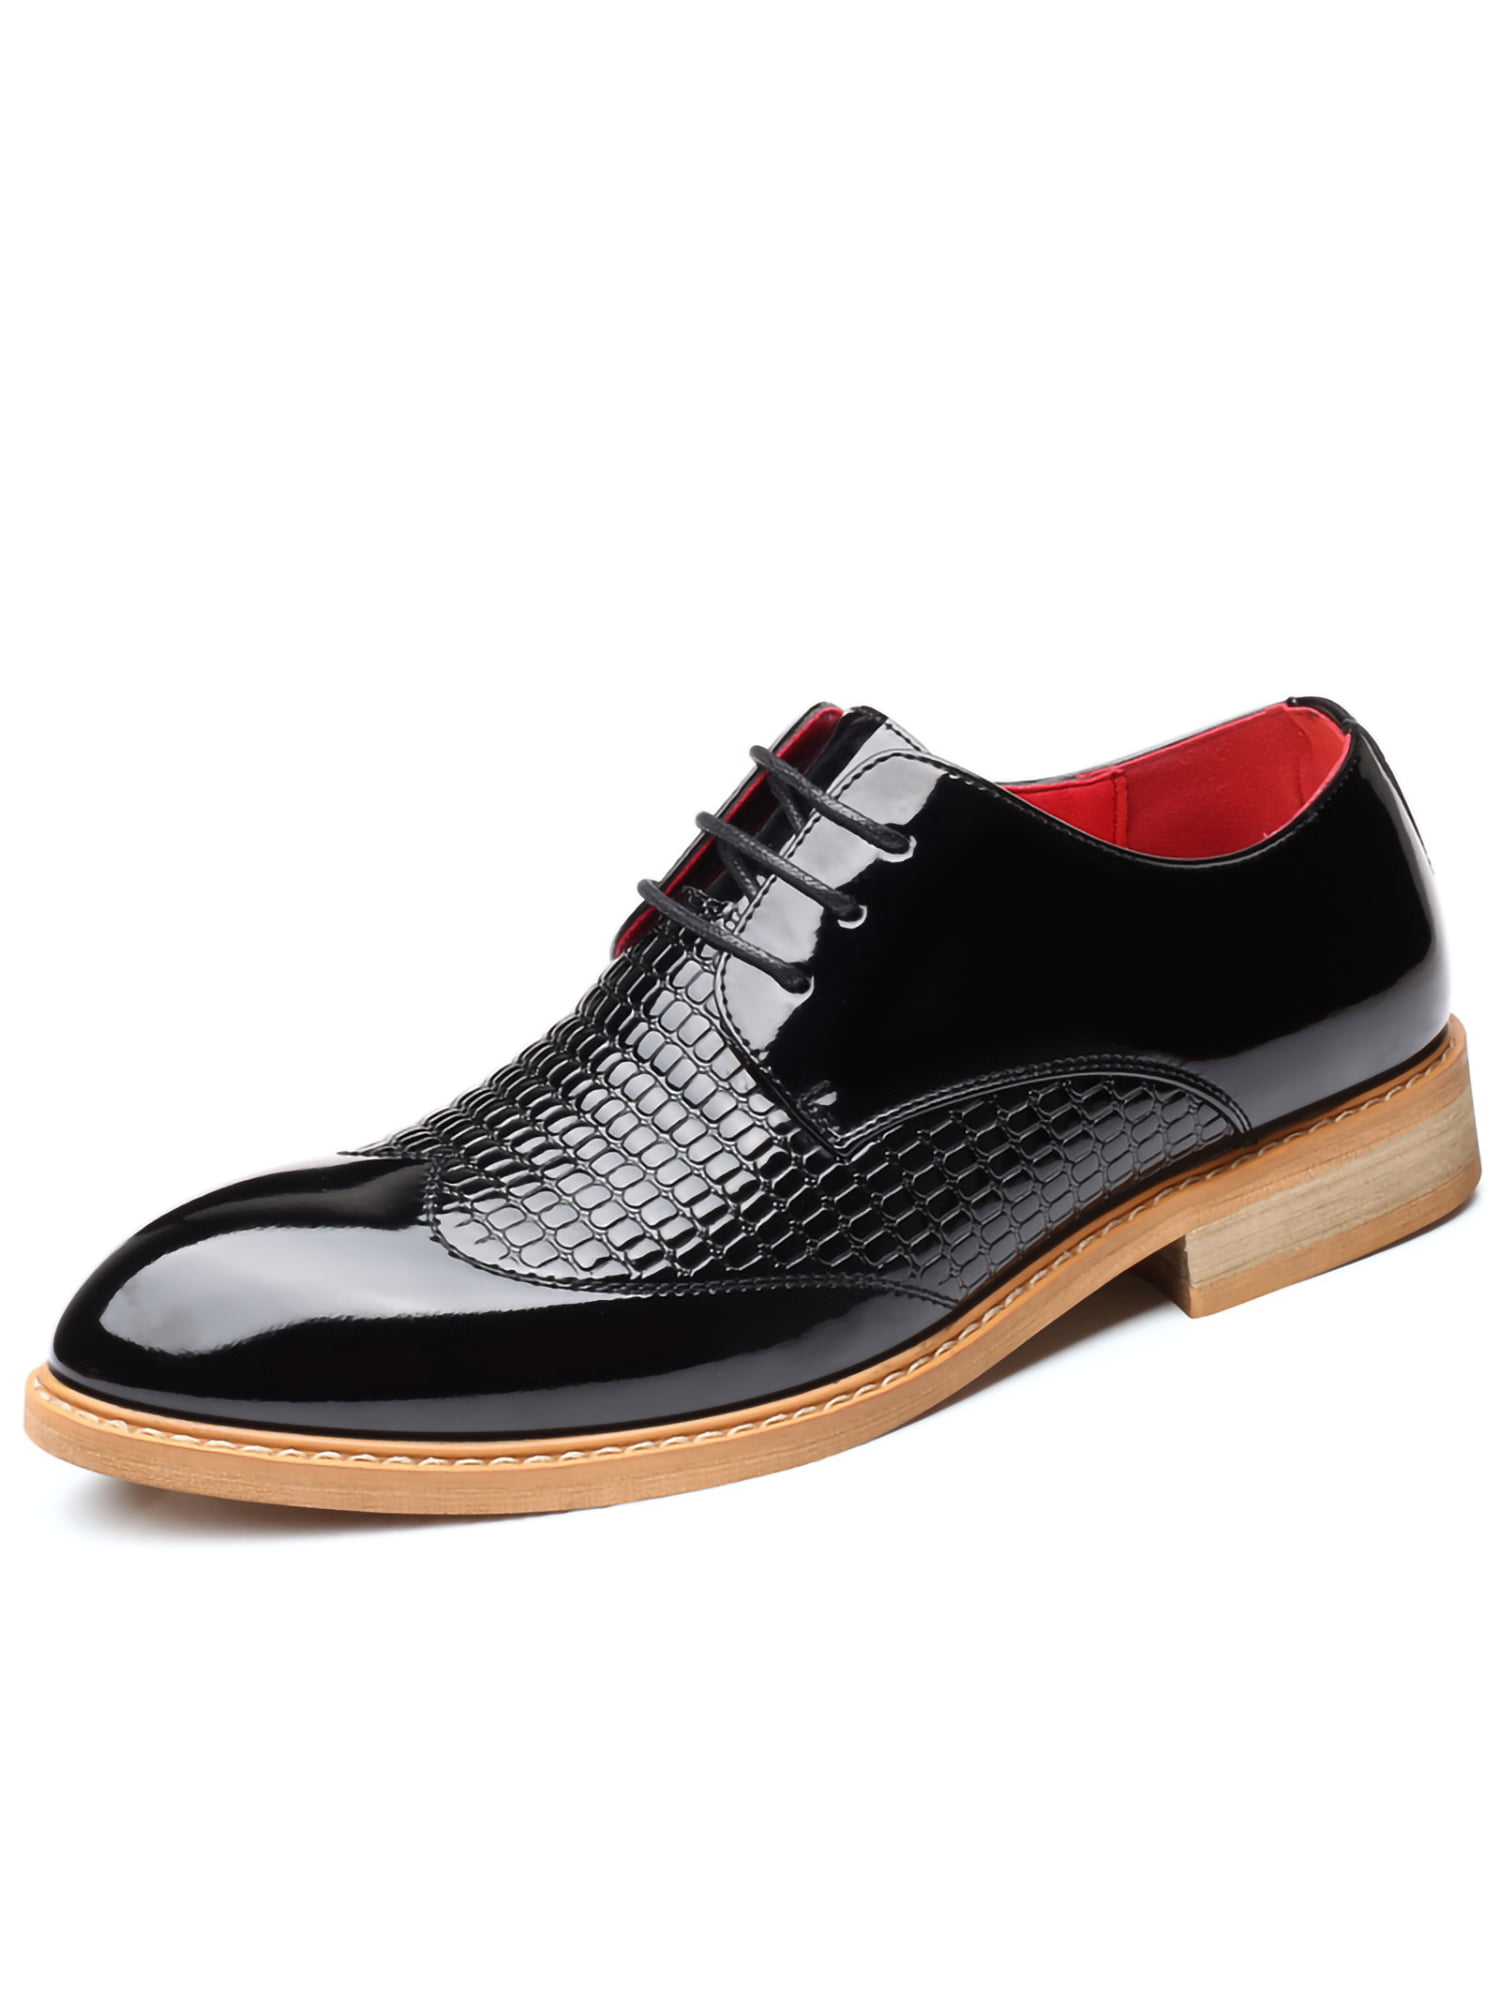 Mens Brogue Pointed Toe Patent Shiny Jazz Lace Up Dress formal Shoes Wing tips 